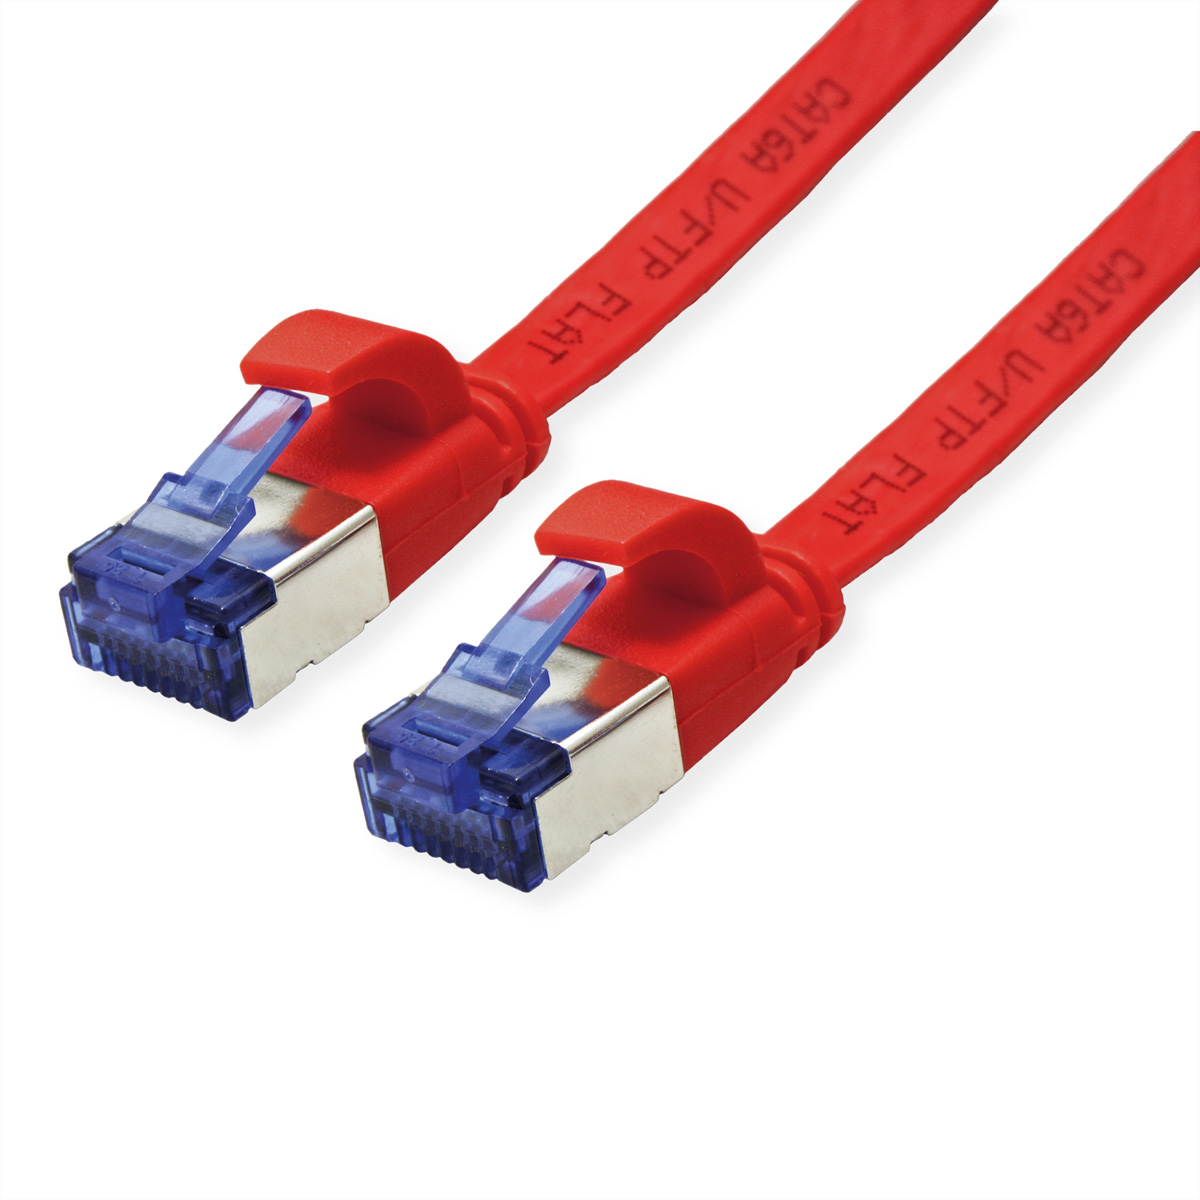 VALUE Patchkabel Kat.6A (Class EA) FTP, extra-flach, rot, 1 m